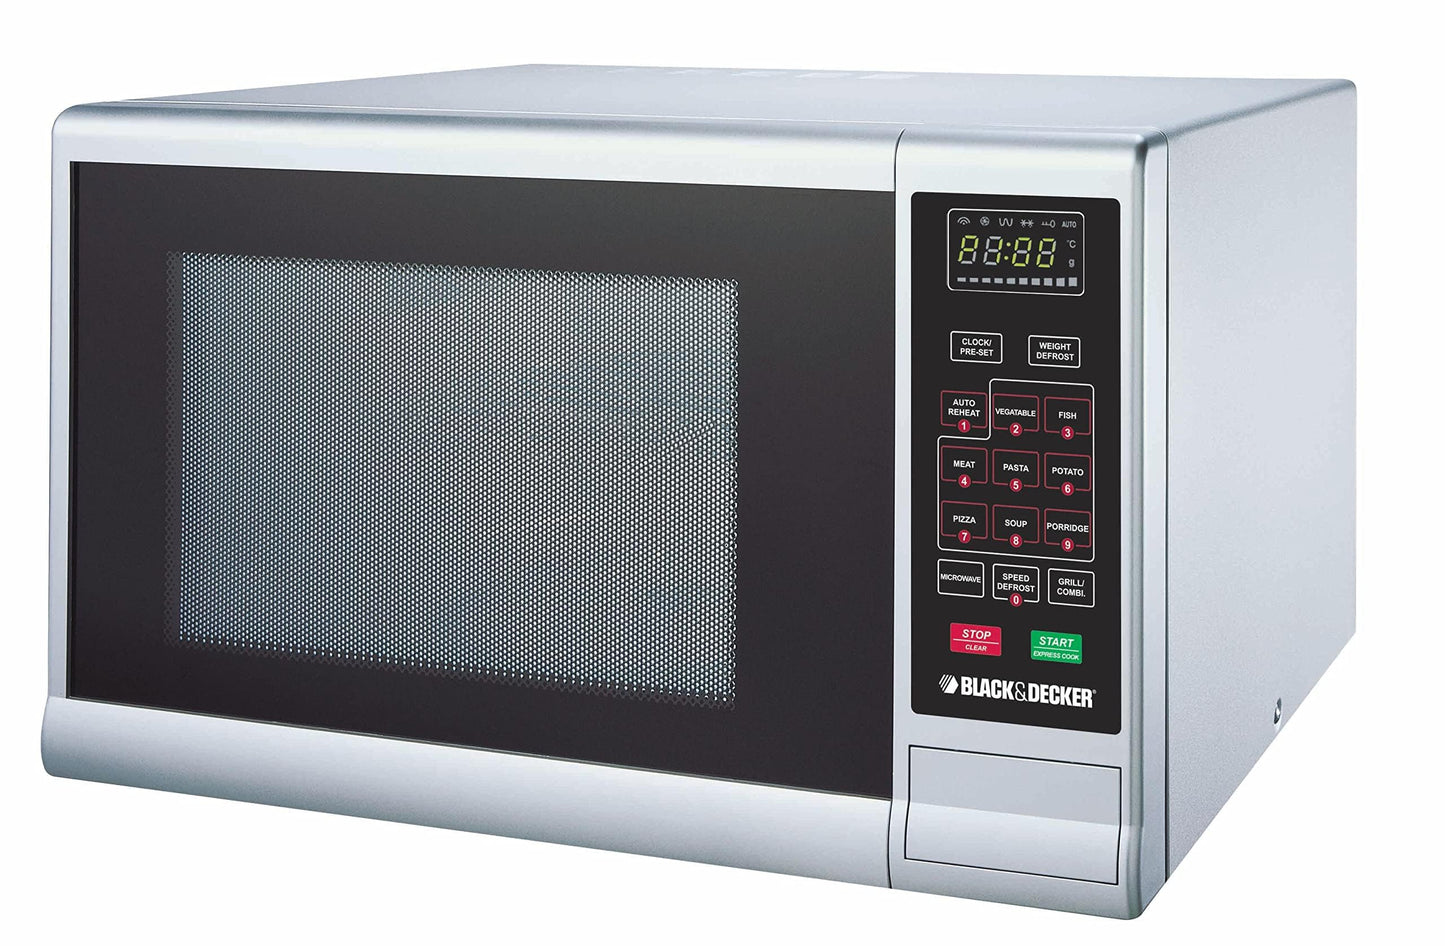 BLACK+DECKER 30L 900W Digital Microwave With Grill Silver, 9 Presets 5 Power Levels With Weight/Time Defrost Function+Auto Reheat And Combination For Even Cooking&Heating MZ3000PG-B5